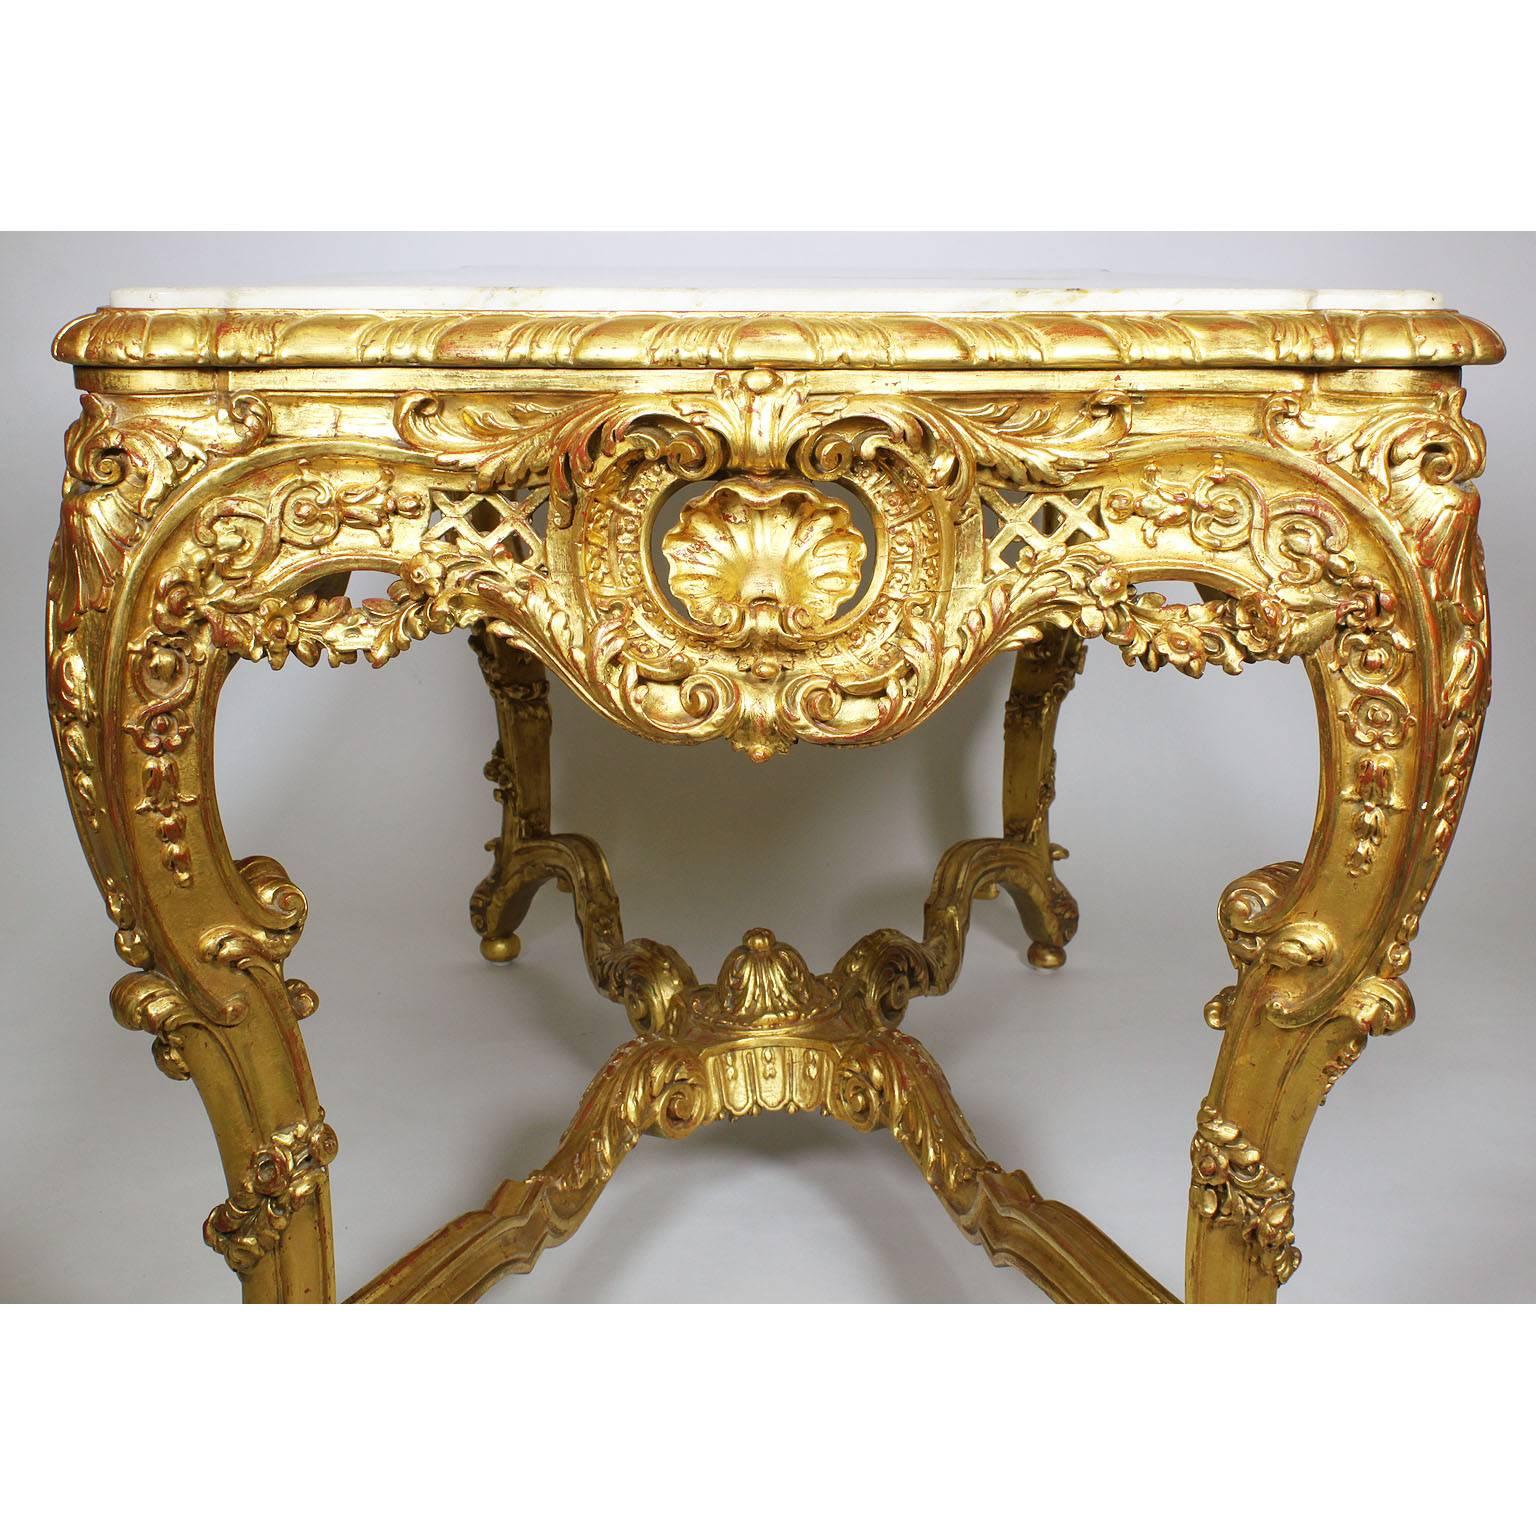 French Belle Époque 19th-20th Century Giltwood Carved Rococo Center Hall Table For Sale 1